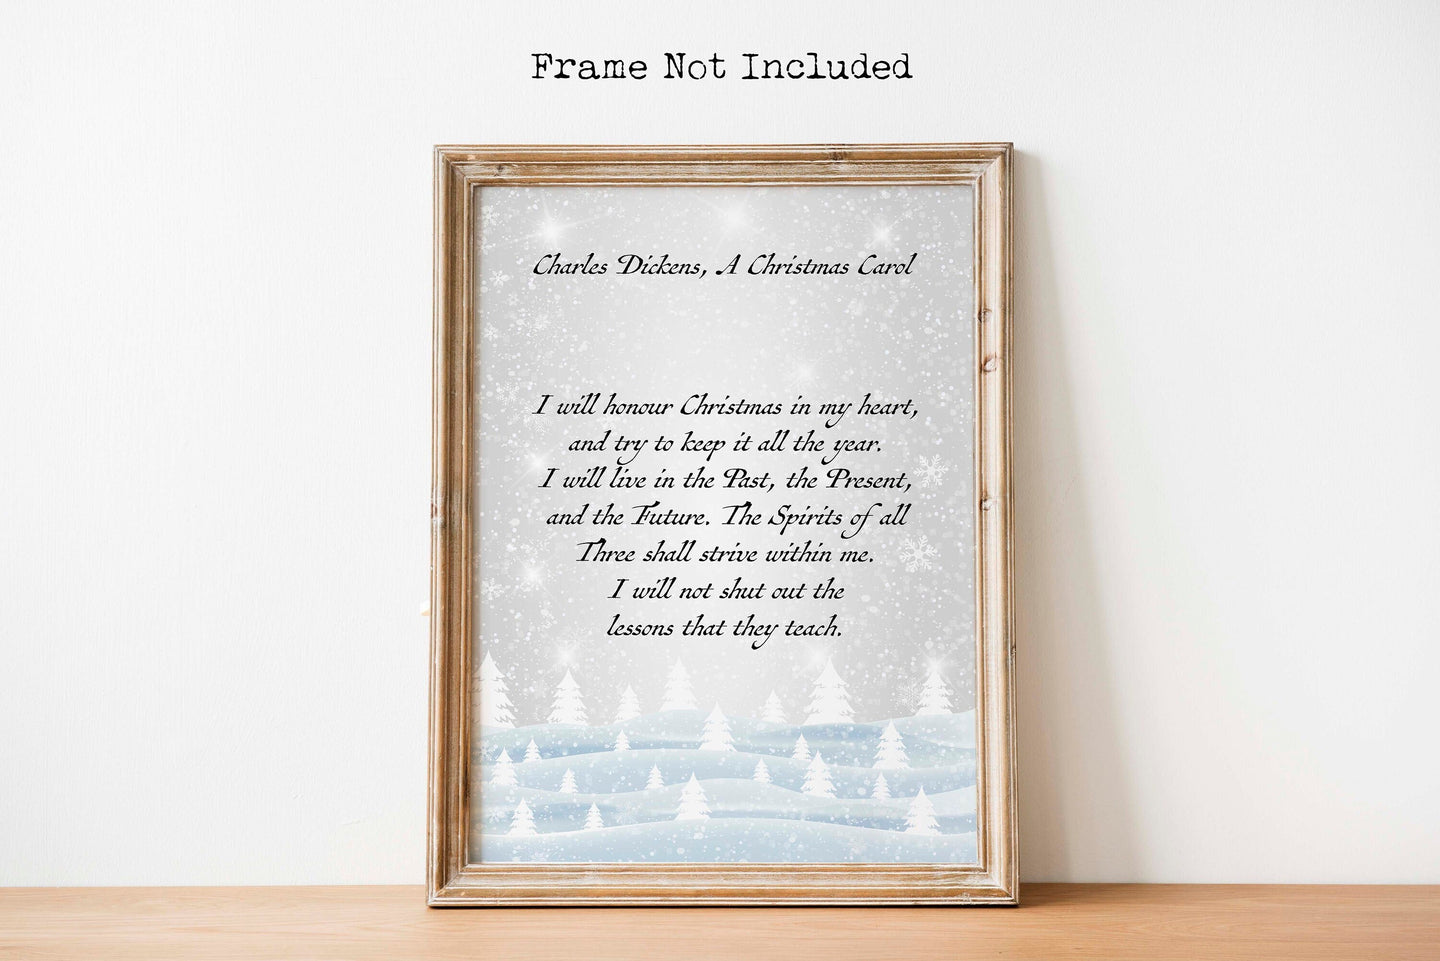 A Christmas Carol Quote - Charles Dickens I will honor Christmas in my heart - Literary wall art poster print, physical print without frame